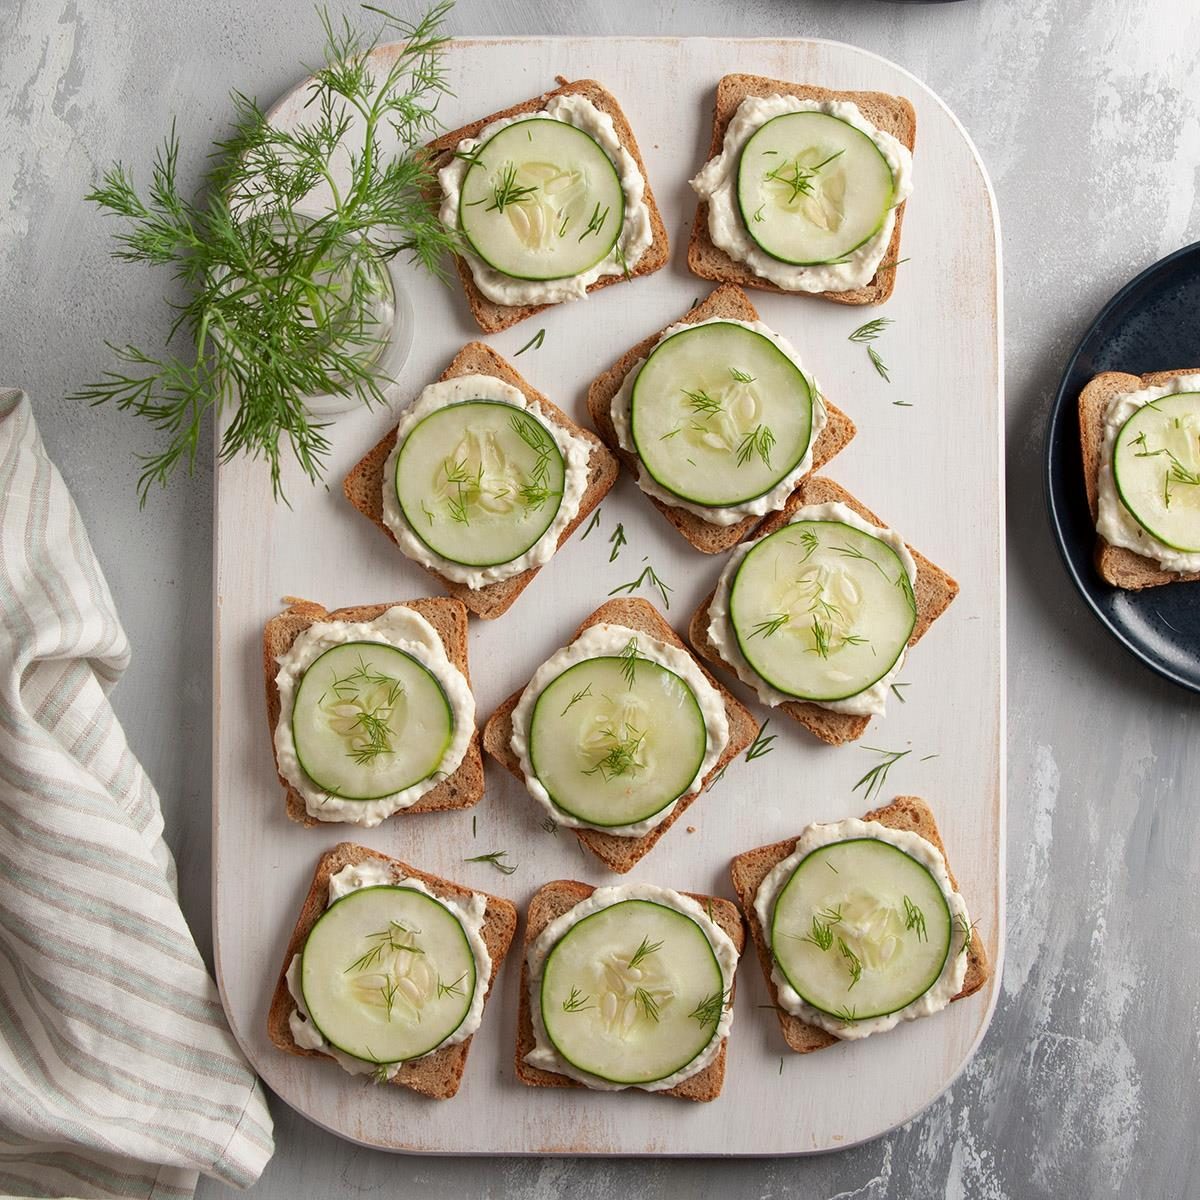 Savory Cucumber Sandwiches Recipe: How to Make It